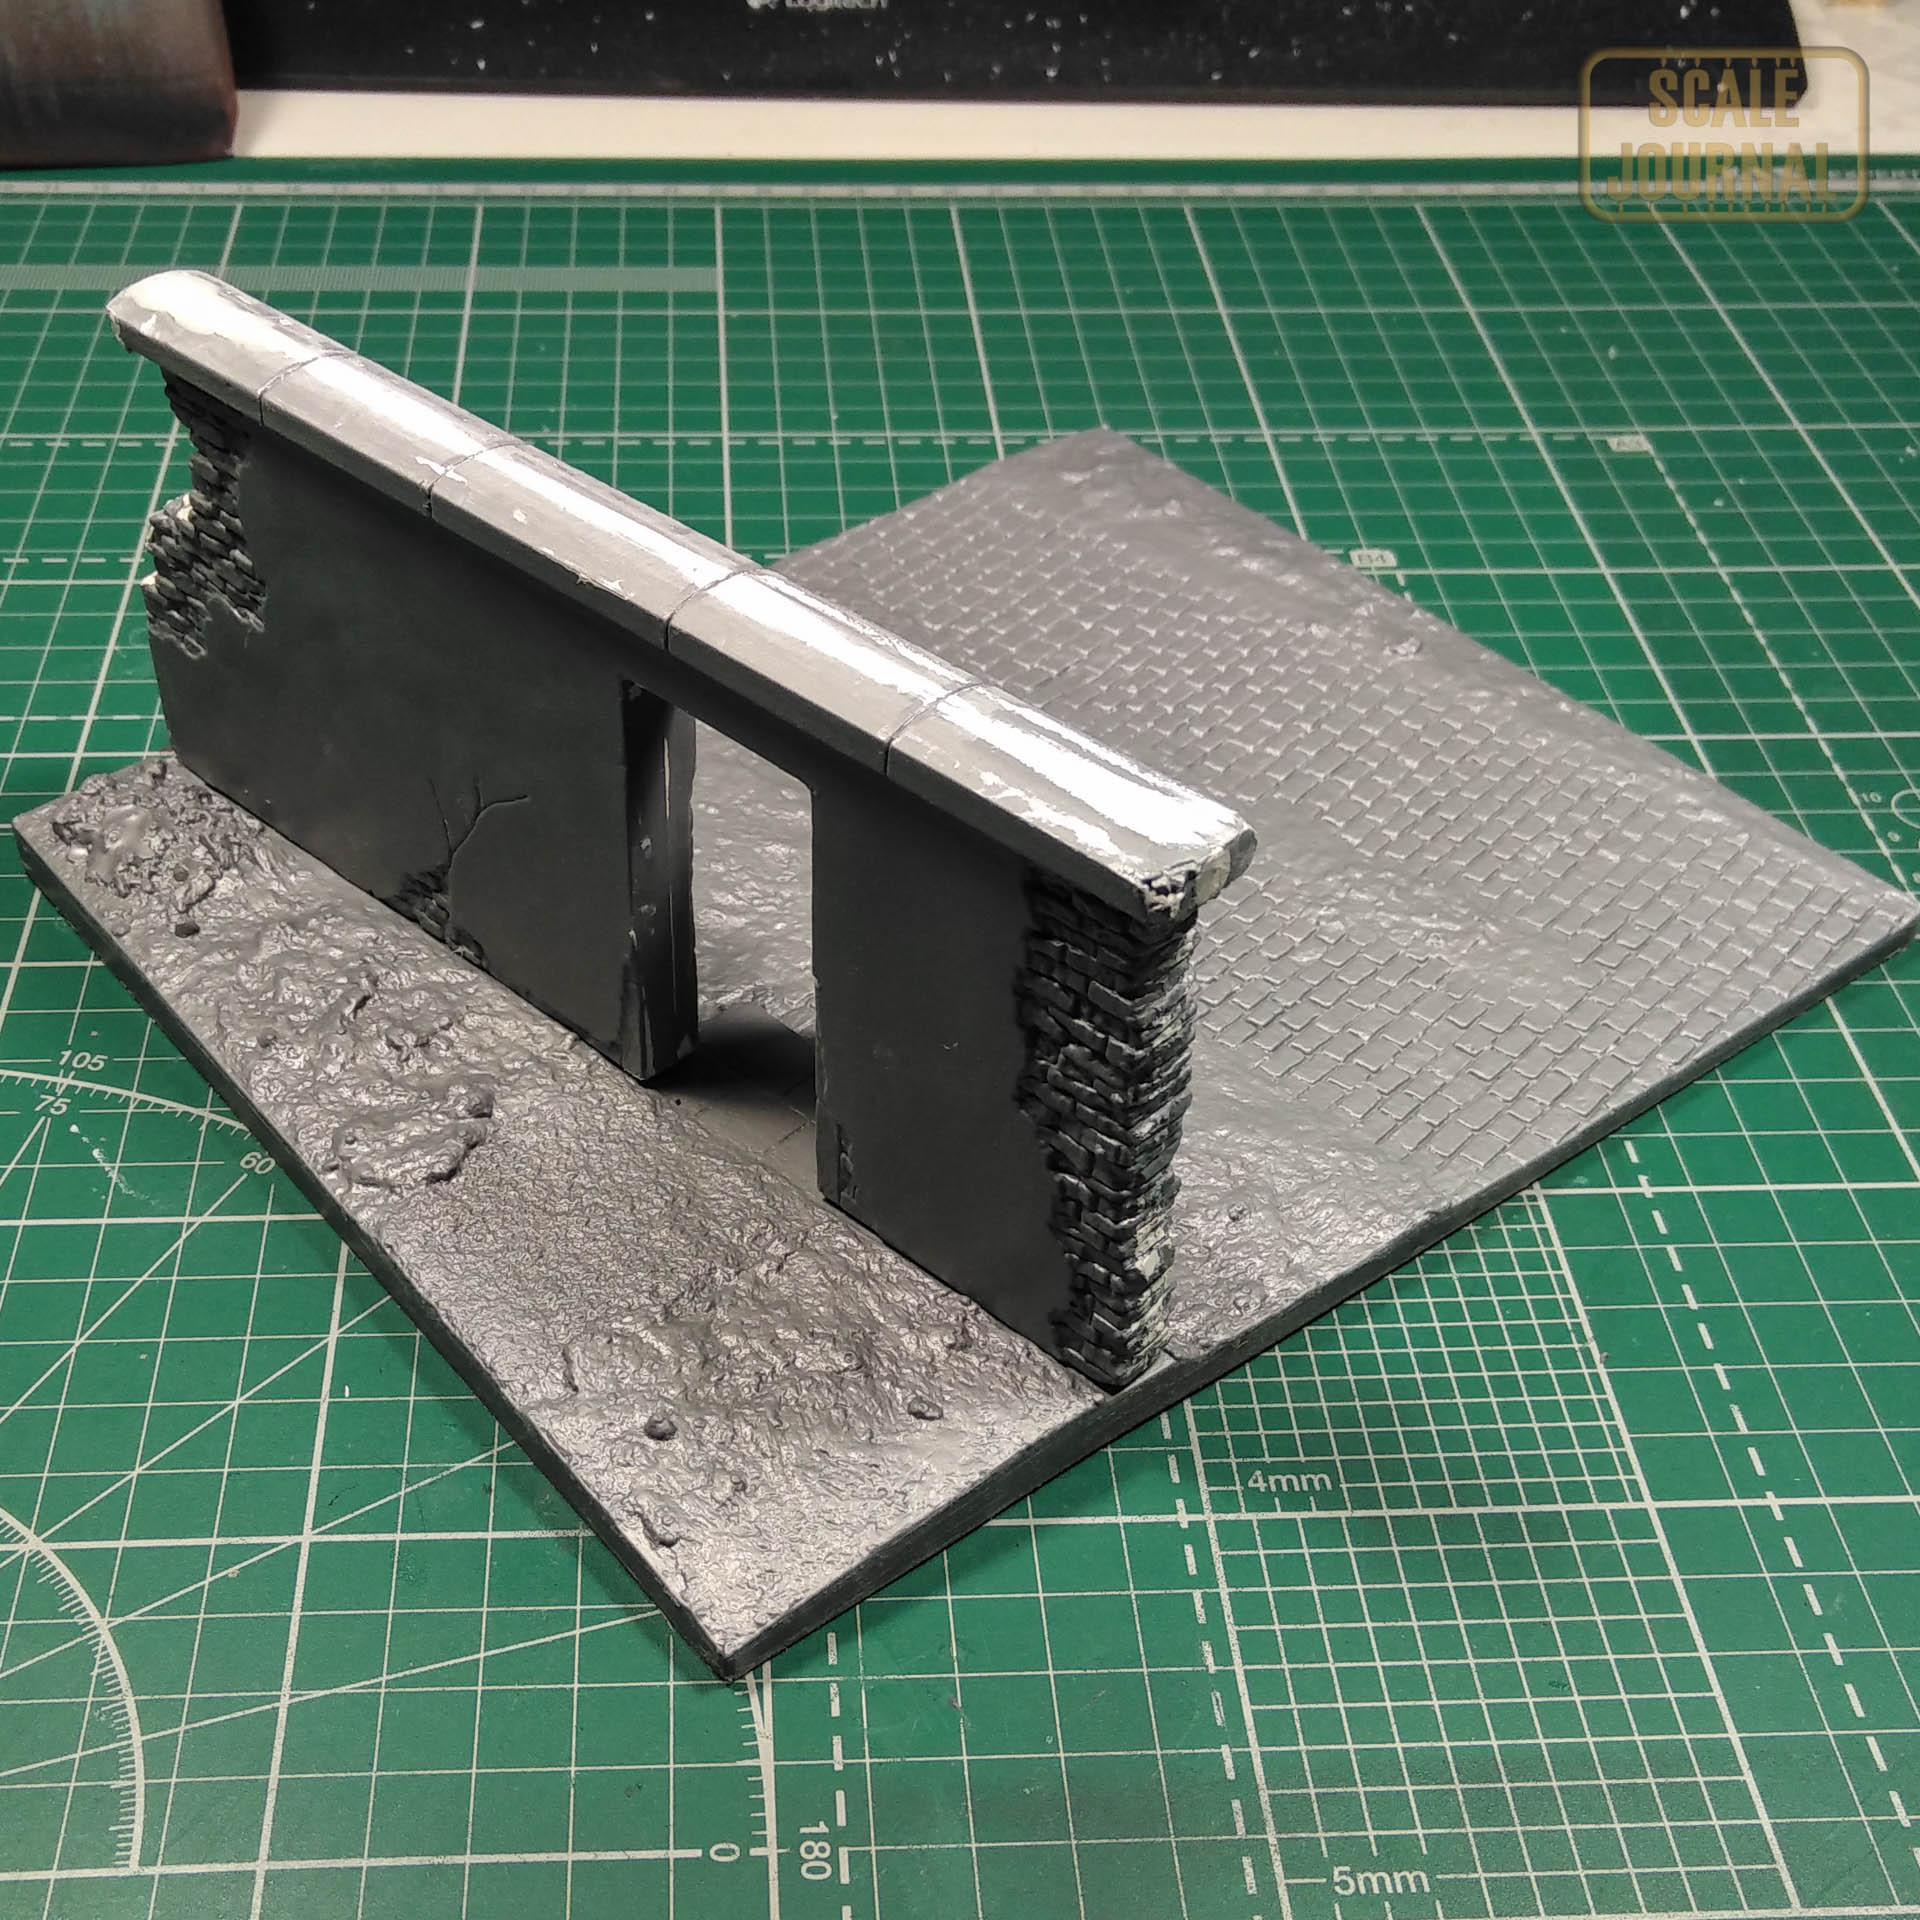 1/35 Wall with base (Miniart 36035)